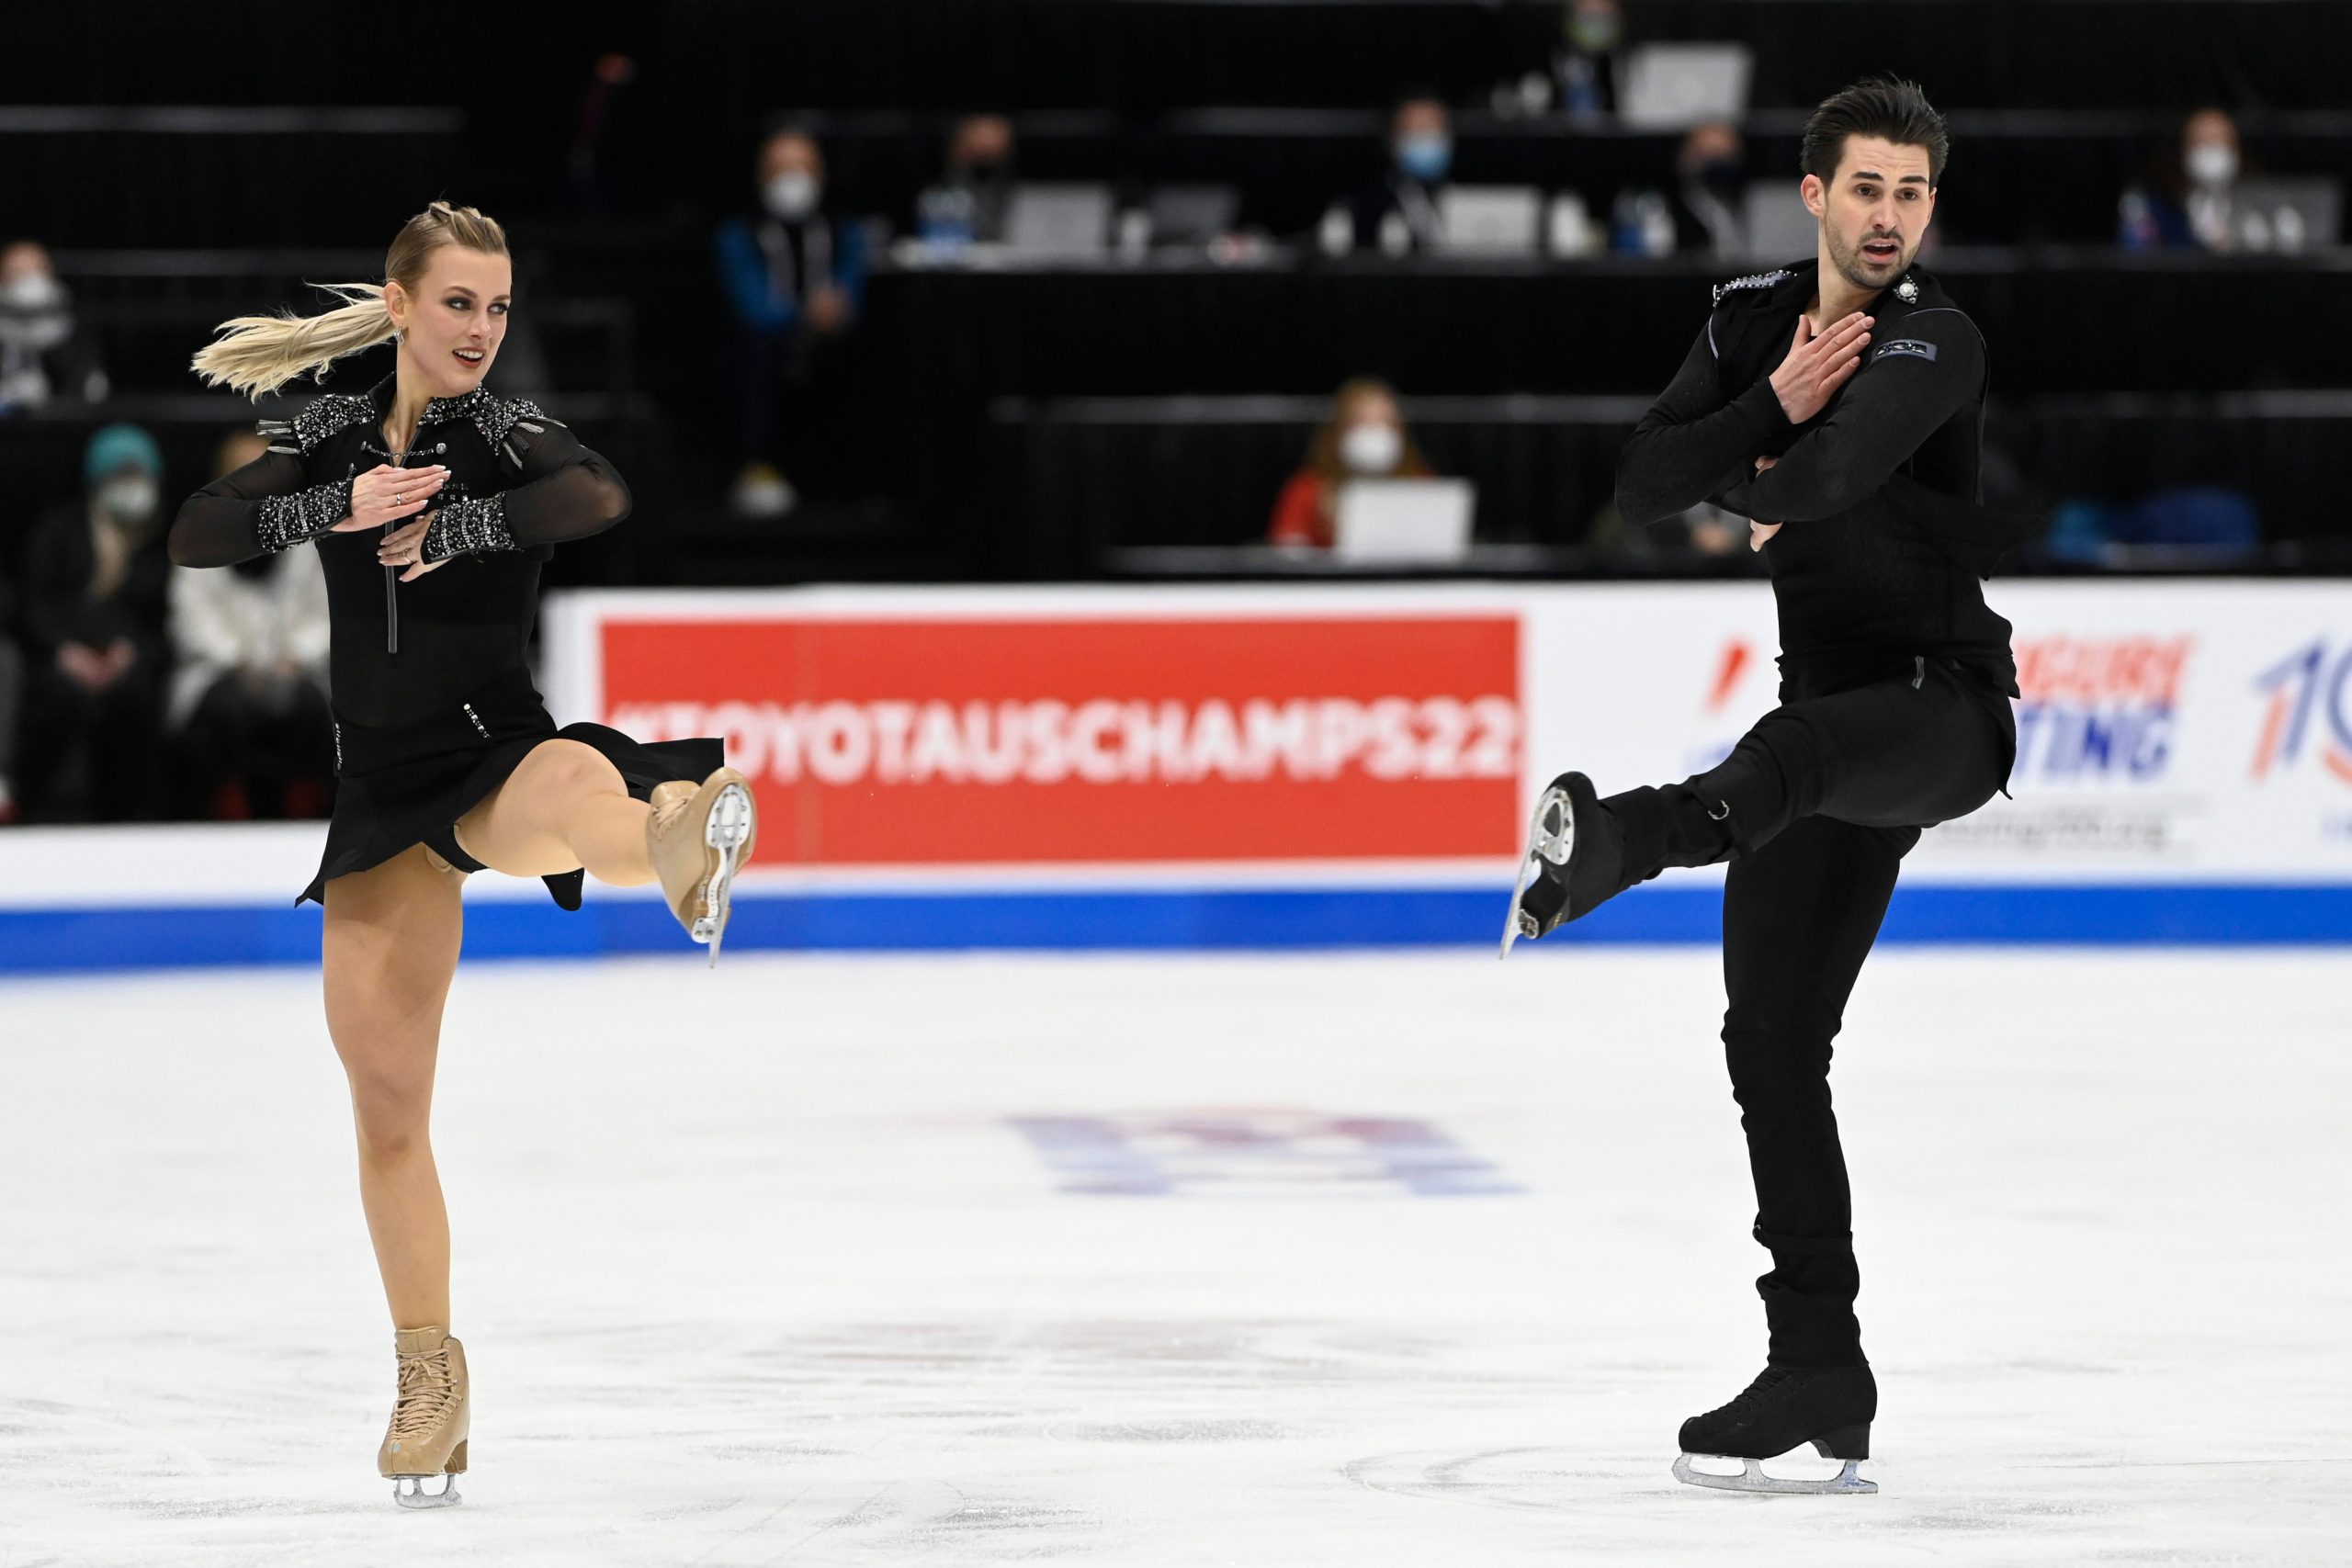 US figure skating and COVID: Athletes unsettled after several outbreaks